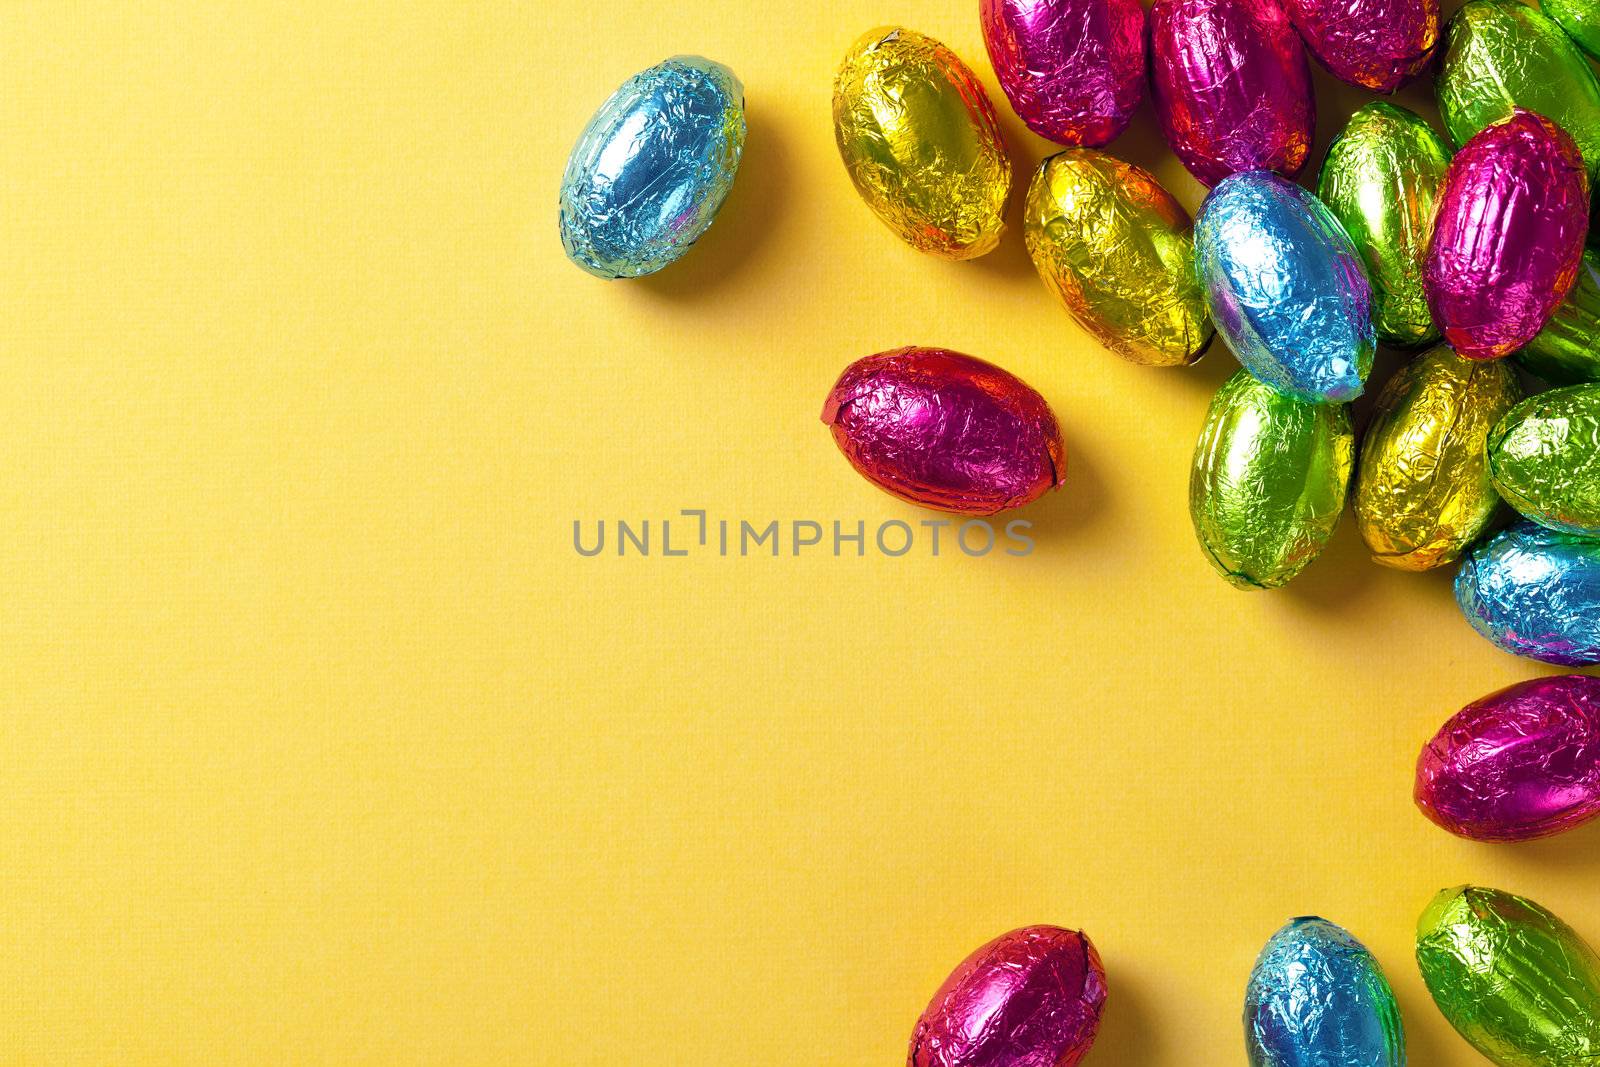 Colorful chocolate easter eggs on yellow paper background. Top view, macro shot